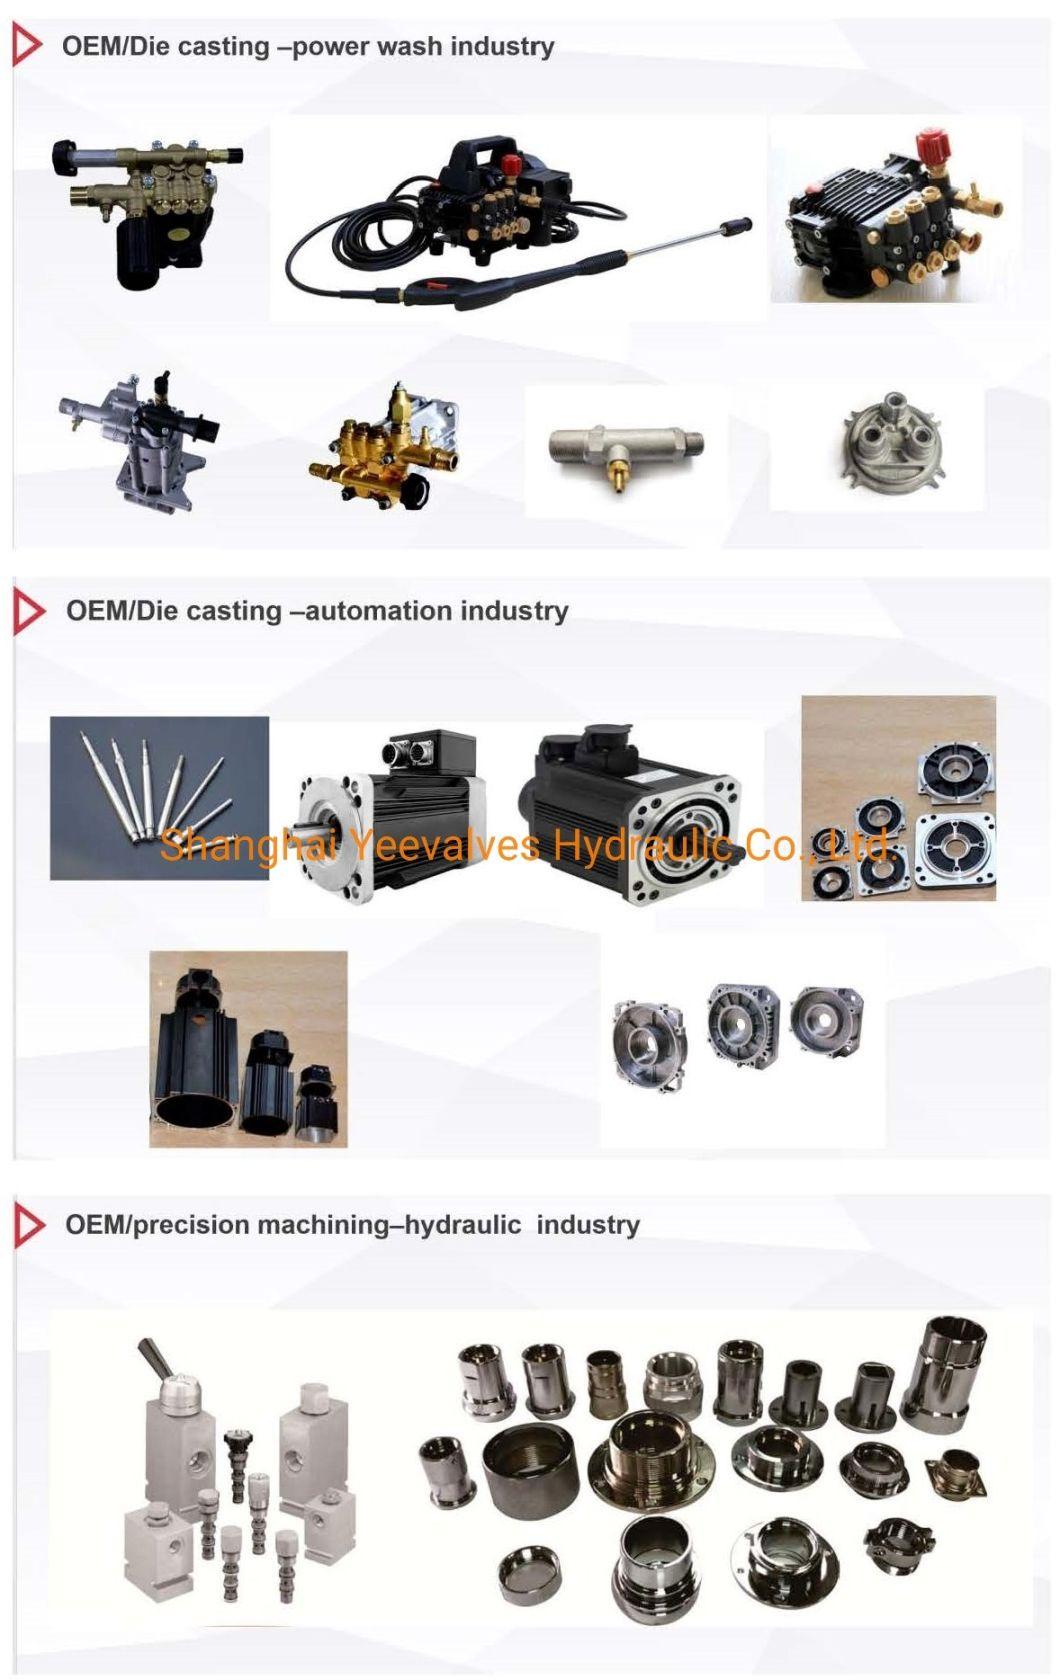 Sun Rexroth Hawe Cartridge Valve Hydraulic Valves Operated Directly Pressure with CNC Machining